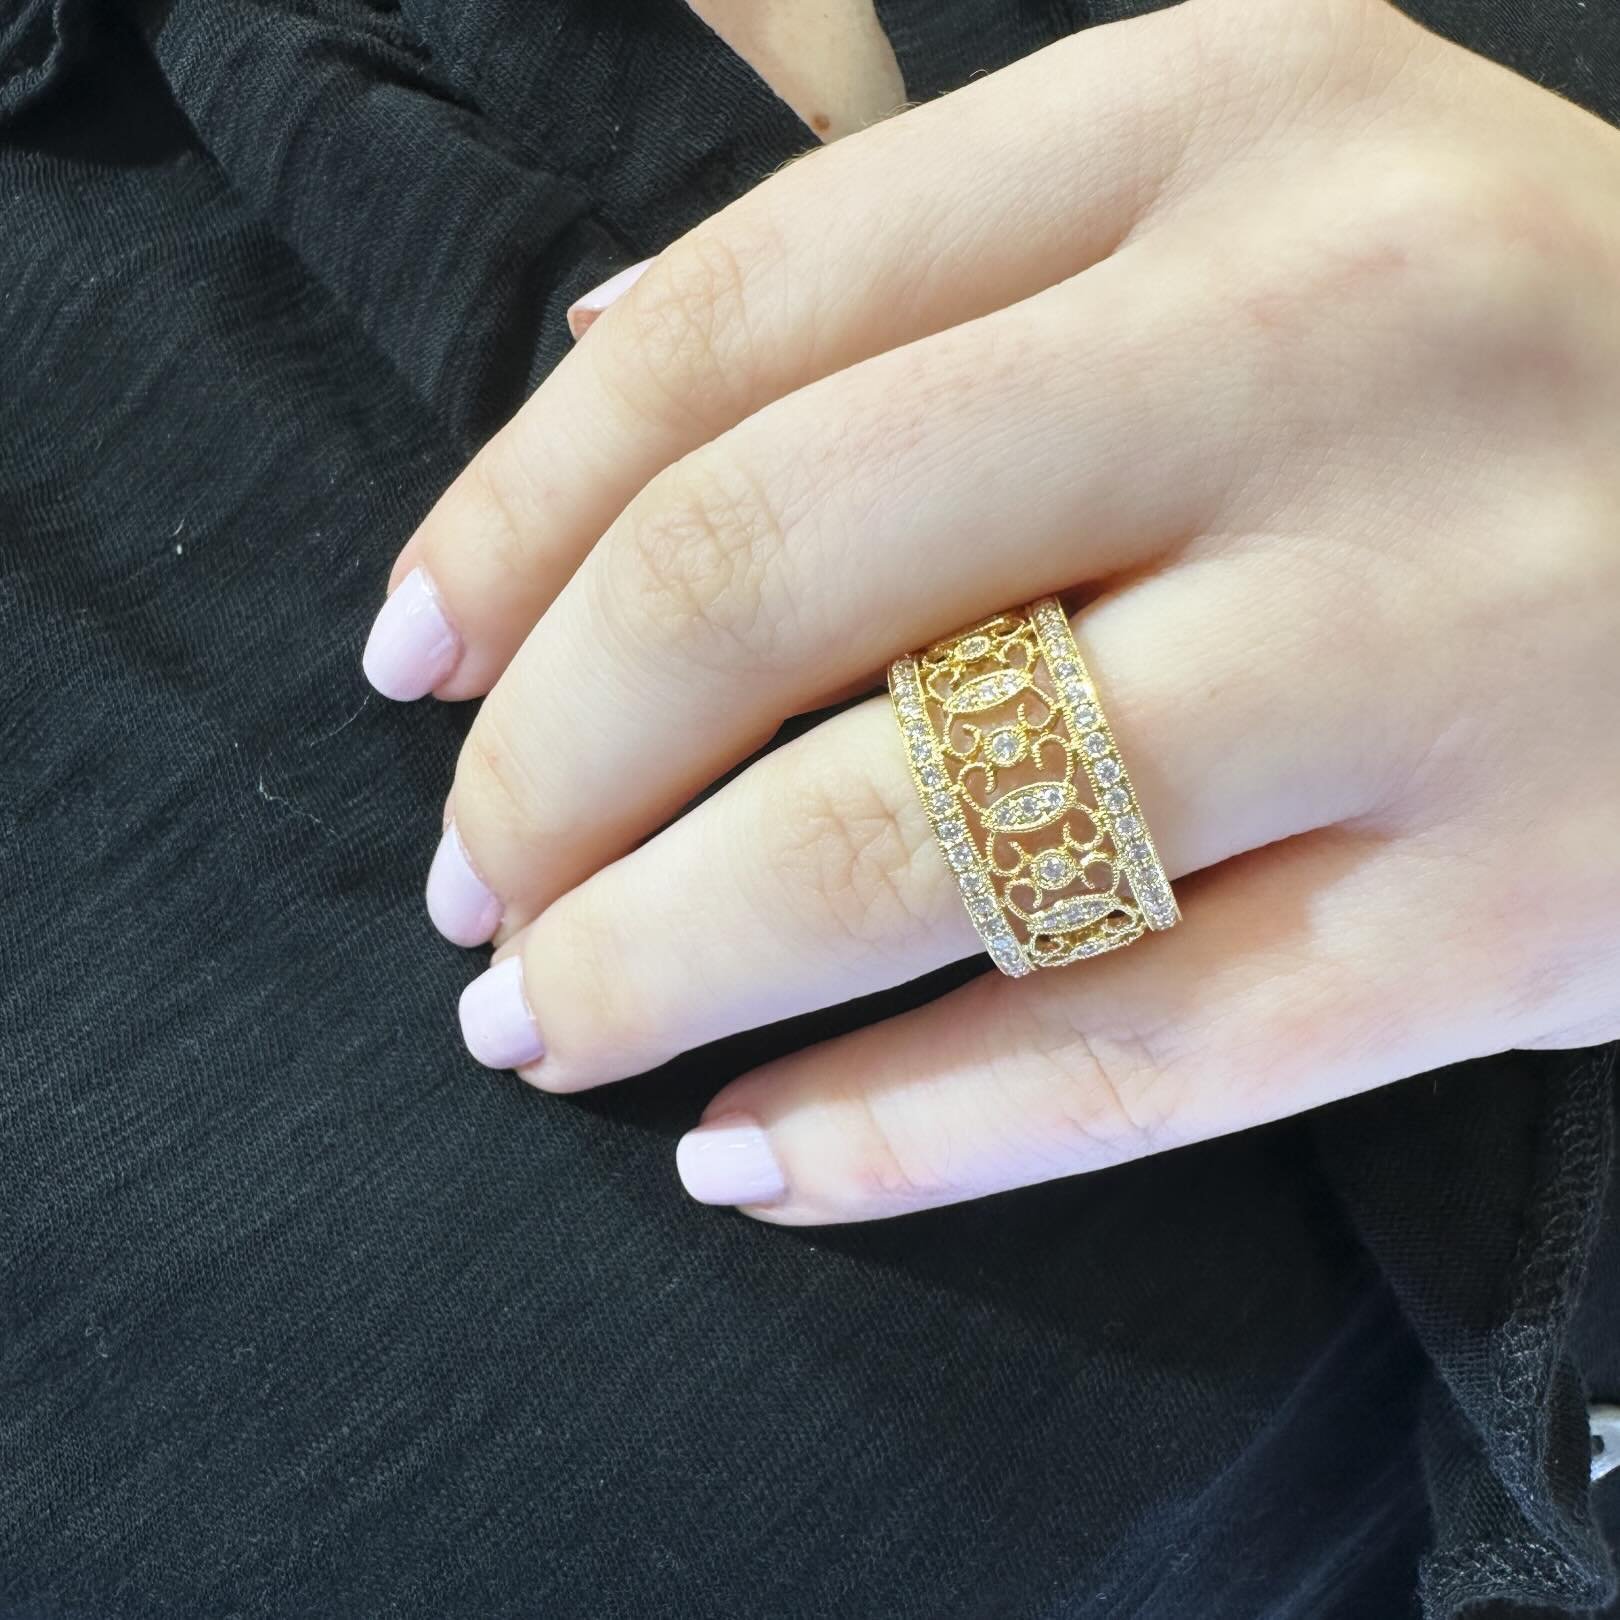 The most stunning eternity band 
Now on SALE! 
Size 6.5 ONLY 
18k yellow gold with over 1 carat of diamonds! 
For a limited time ONLY $1525
Run don&rsquo;t walk! 

#scfinejewelry #diamonds #sale #fashion #ootd #instagood